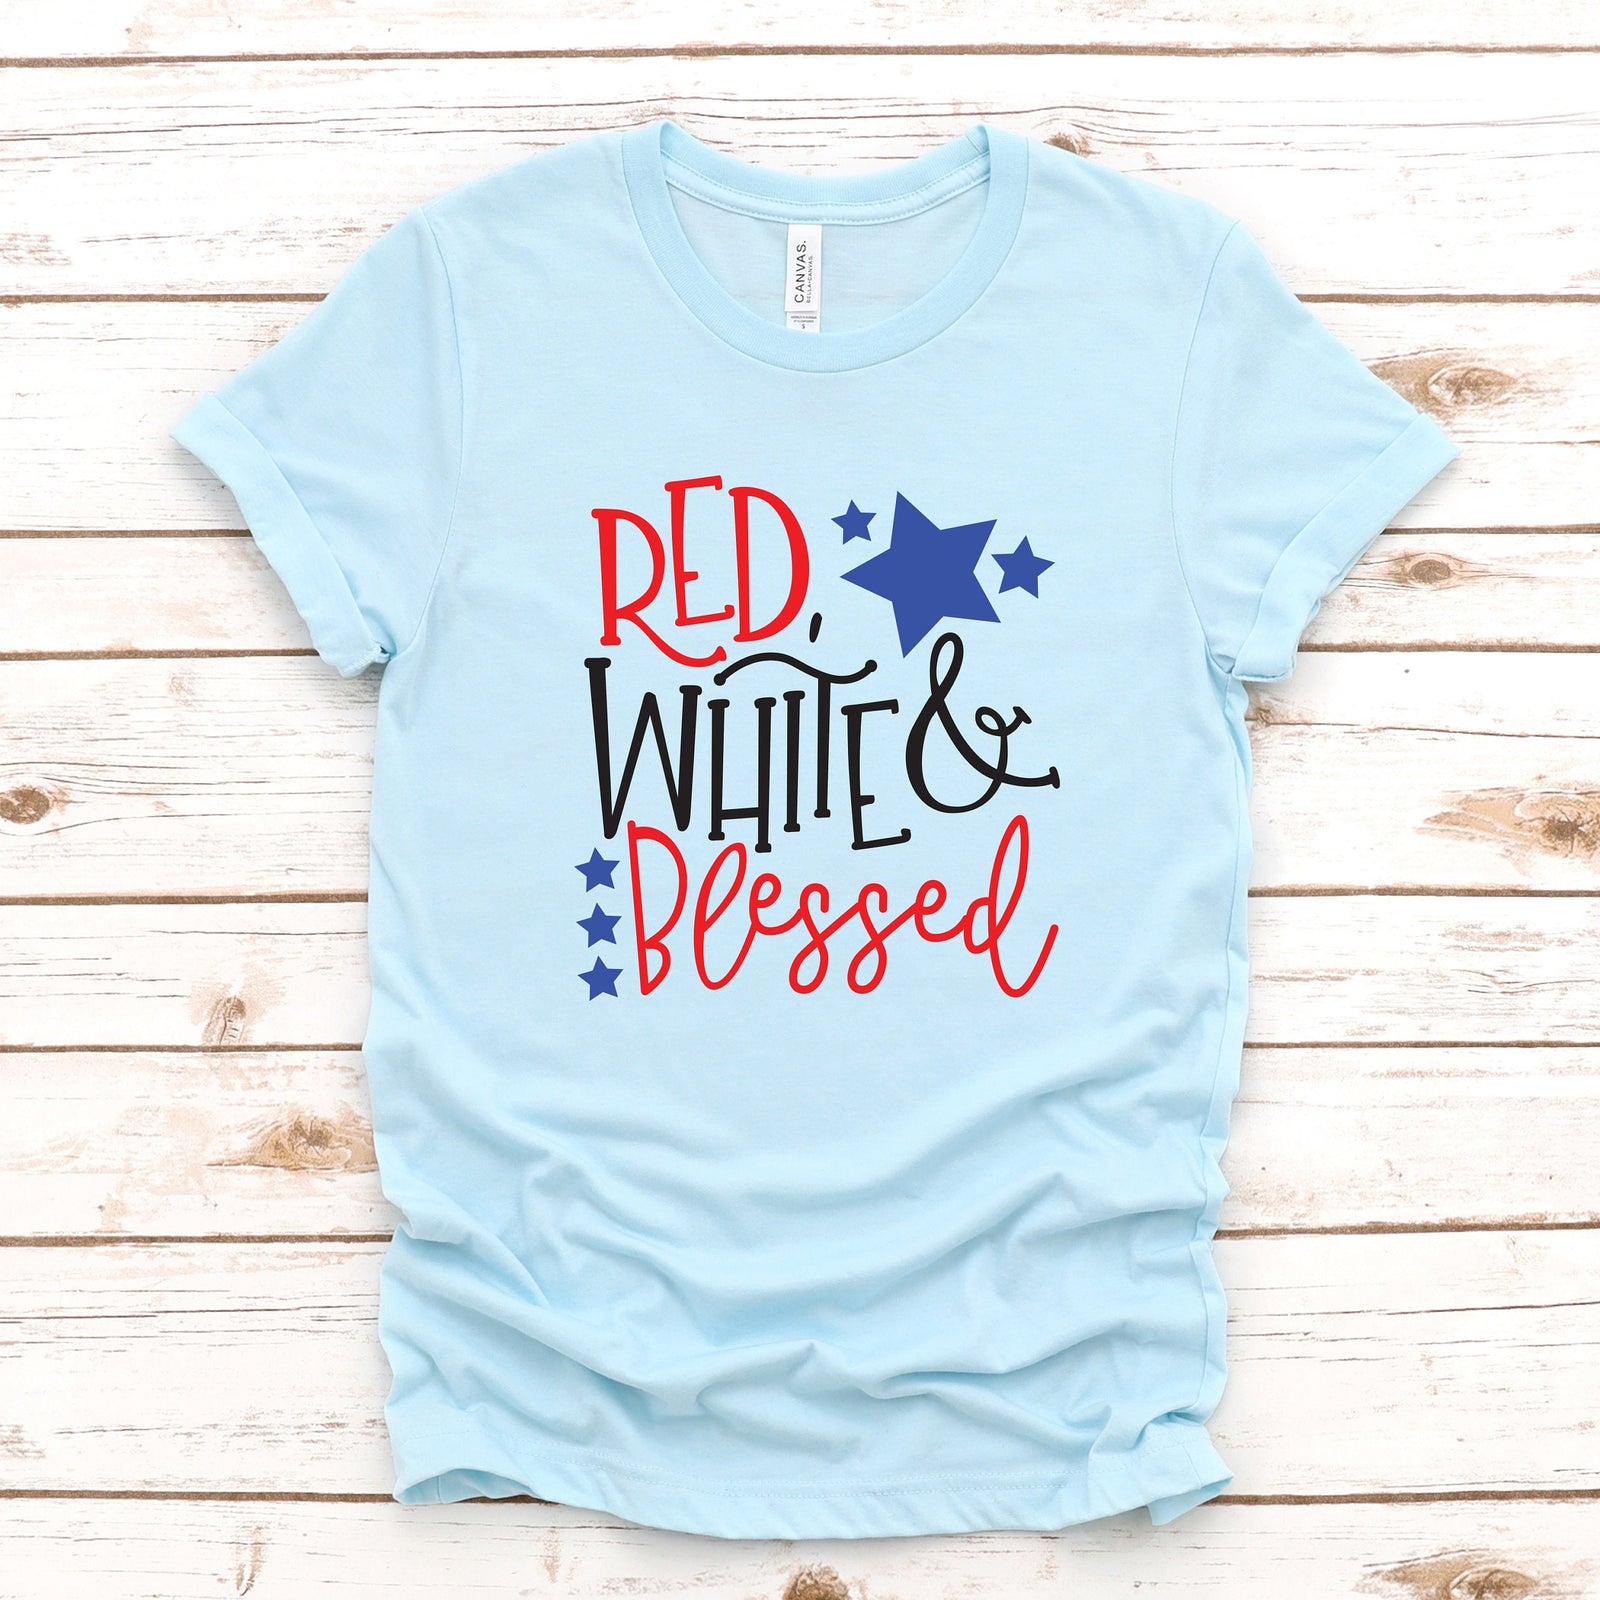 Red White and Blessed- Fourth of July Adult T Shirt - Independence Day - Memorial - Red White and Blue